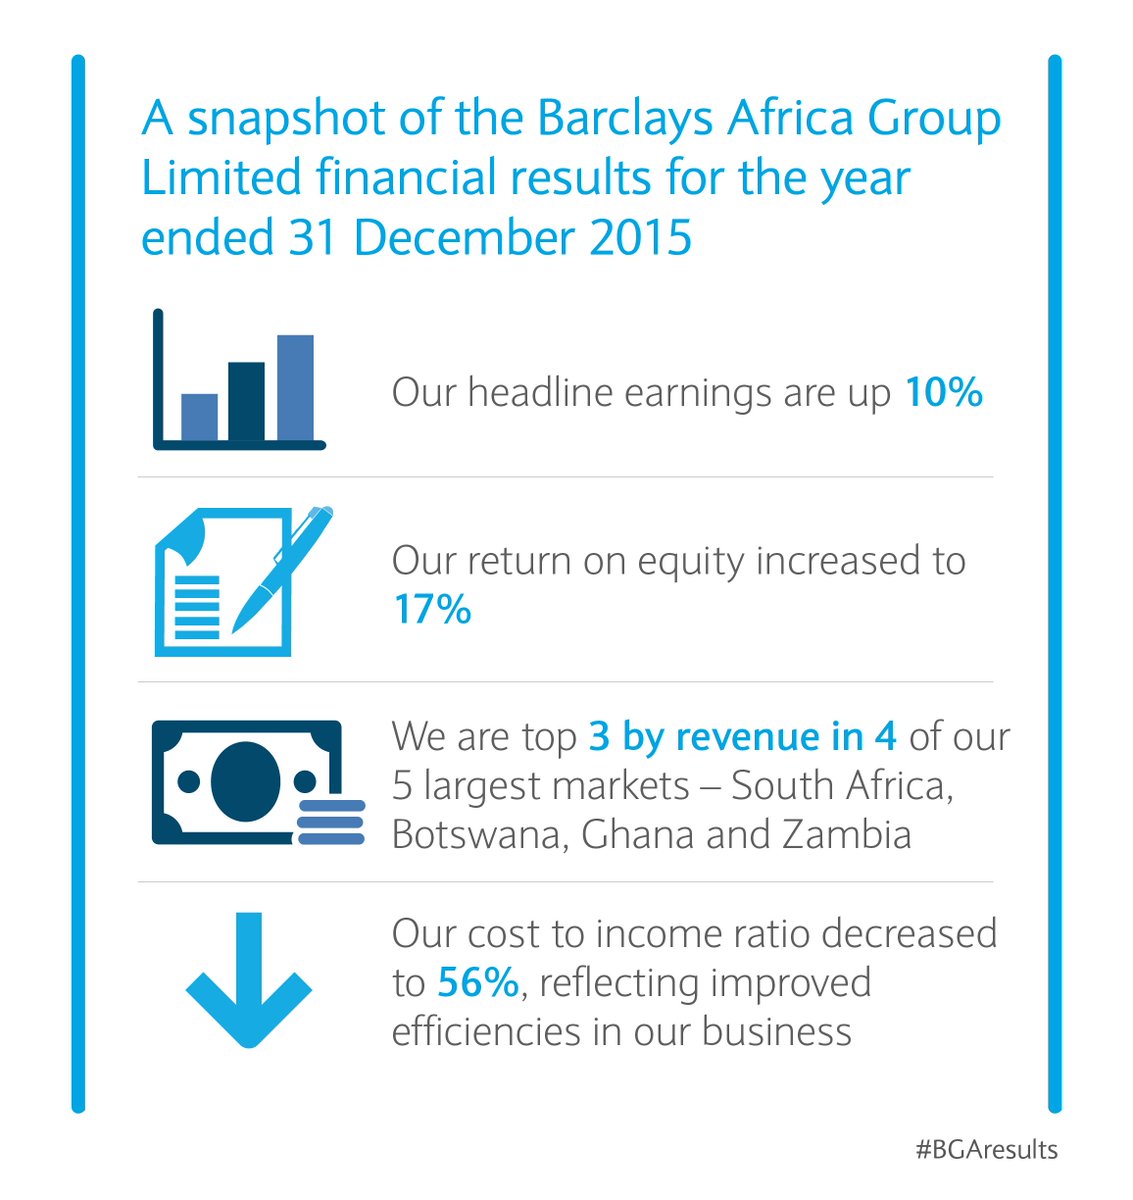 Absa Group On Twitter Barclays Africa Group Ltd Today Announced